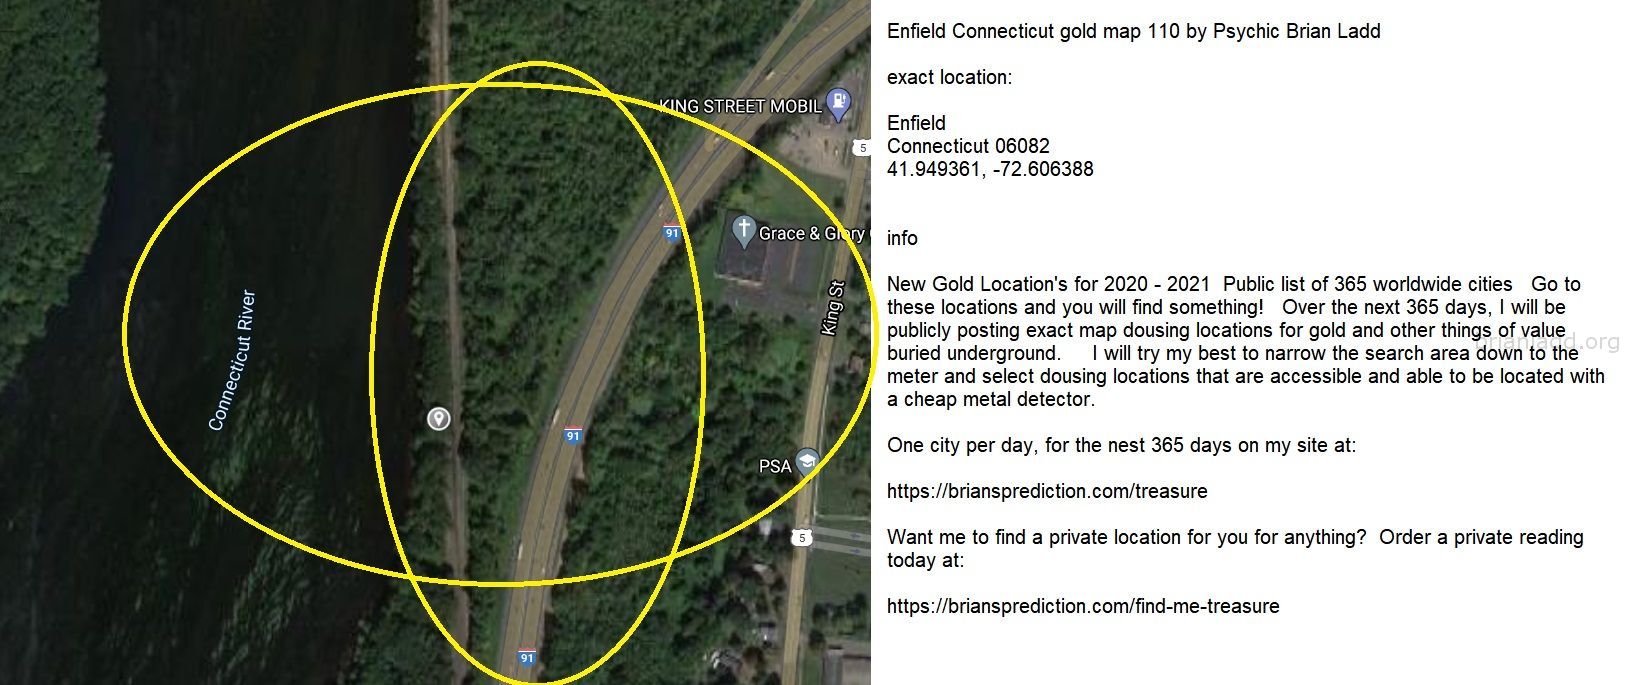 Enfield Connecticut gold map 110 by Psychic Brian Ladd
New Gold Location's for 2020 - 2021  Public list of 365 worldwide cities   Go to these locations and you will find something!   Over the next 365 days, I will be publicly posting exact map dousing locations for gold and other things of value buried underground.     I will try my best to narrow the search area down to the meter and select dousing locations that are accessible and able to be located with a cheap metal detector. One city per day, for the nest 365 days on my site at:  https://briansprediction.com/treasure  Want me to find a private location for you for anything?  Order a private reading today at:  https://briansprediction.com/find-me-treasure
